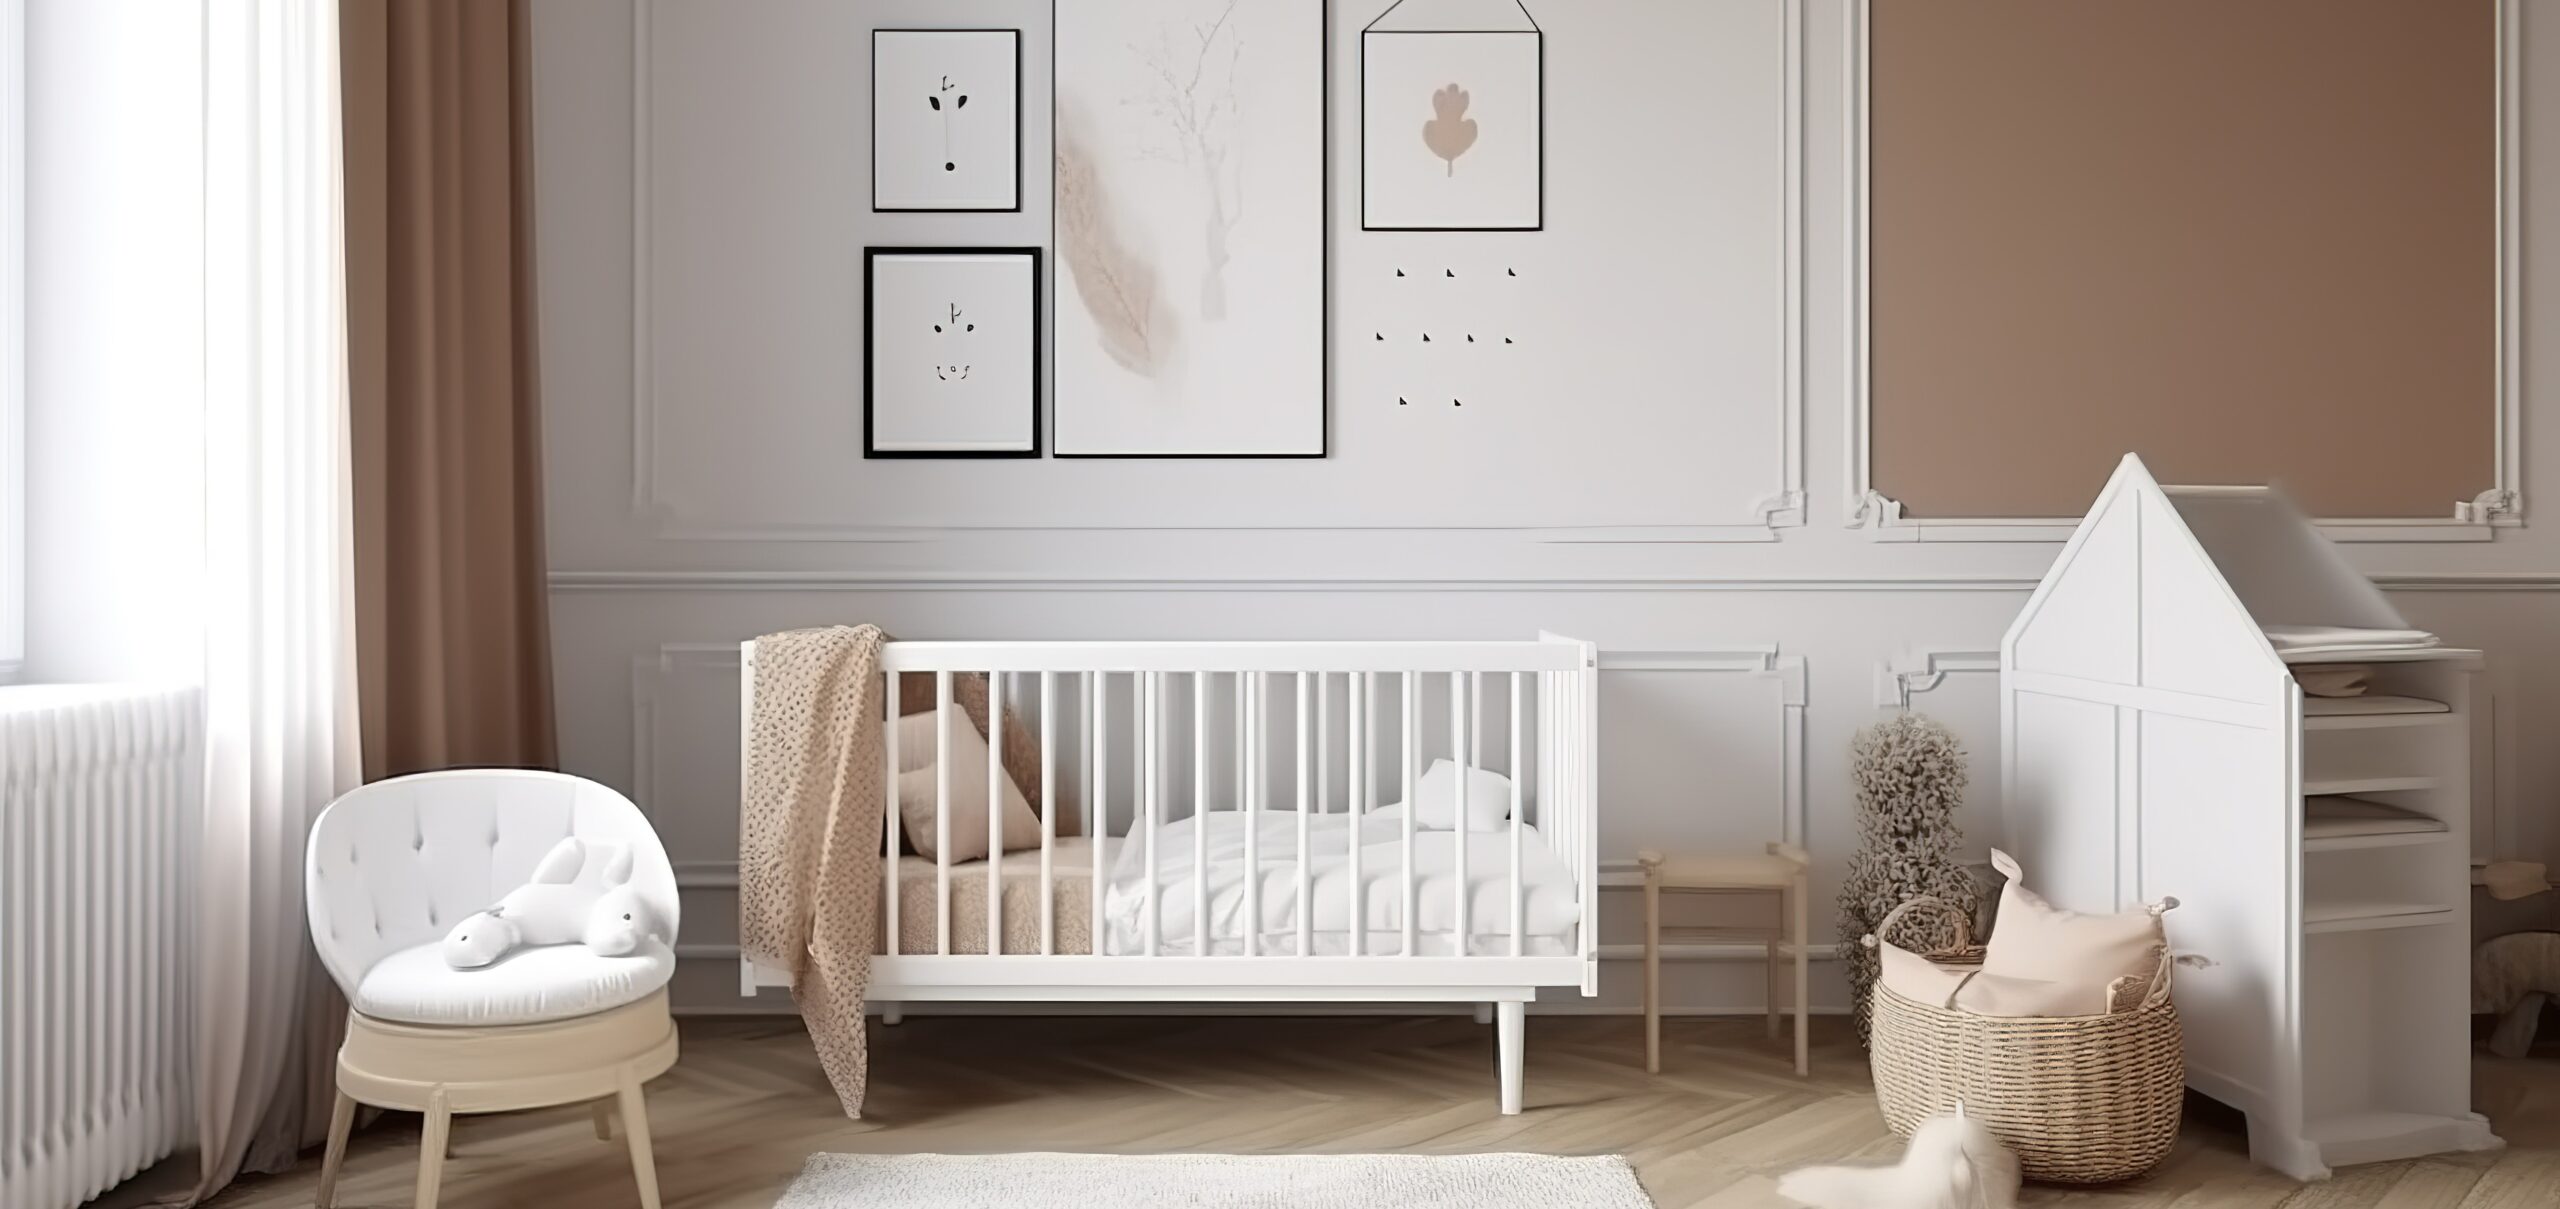 Choosing the Perfect Baby Sleep Furniture: Expert Advice and Recommendations